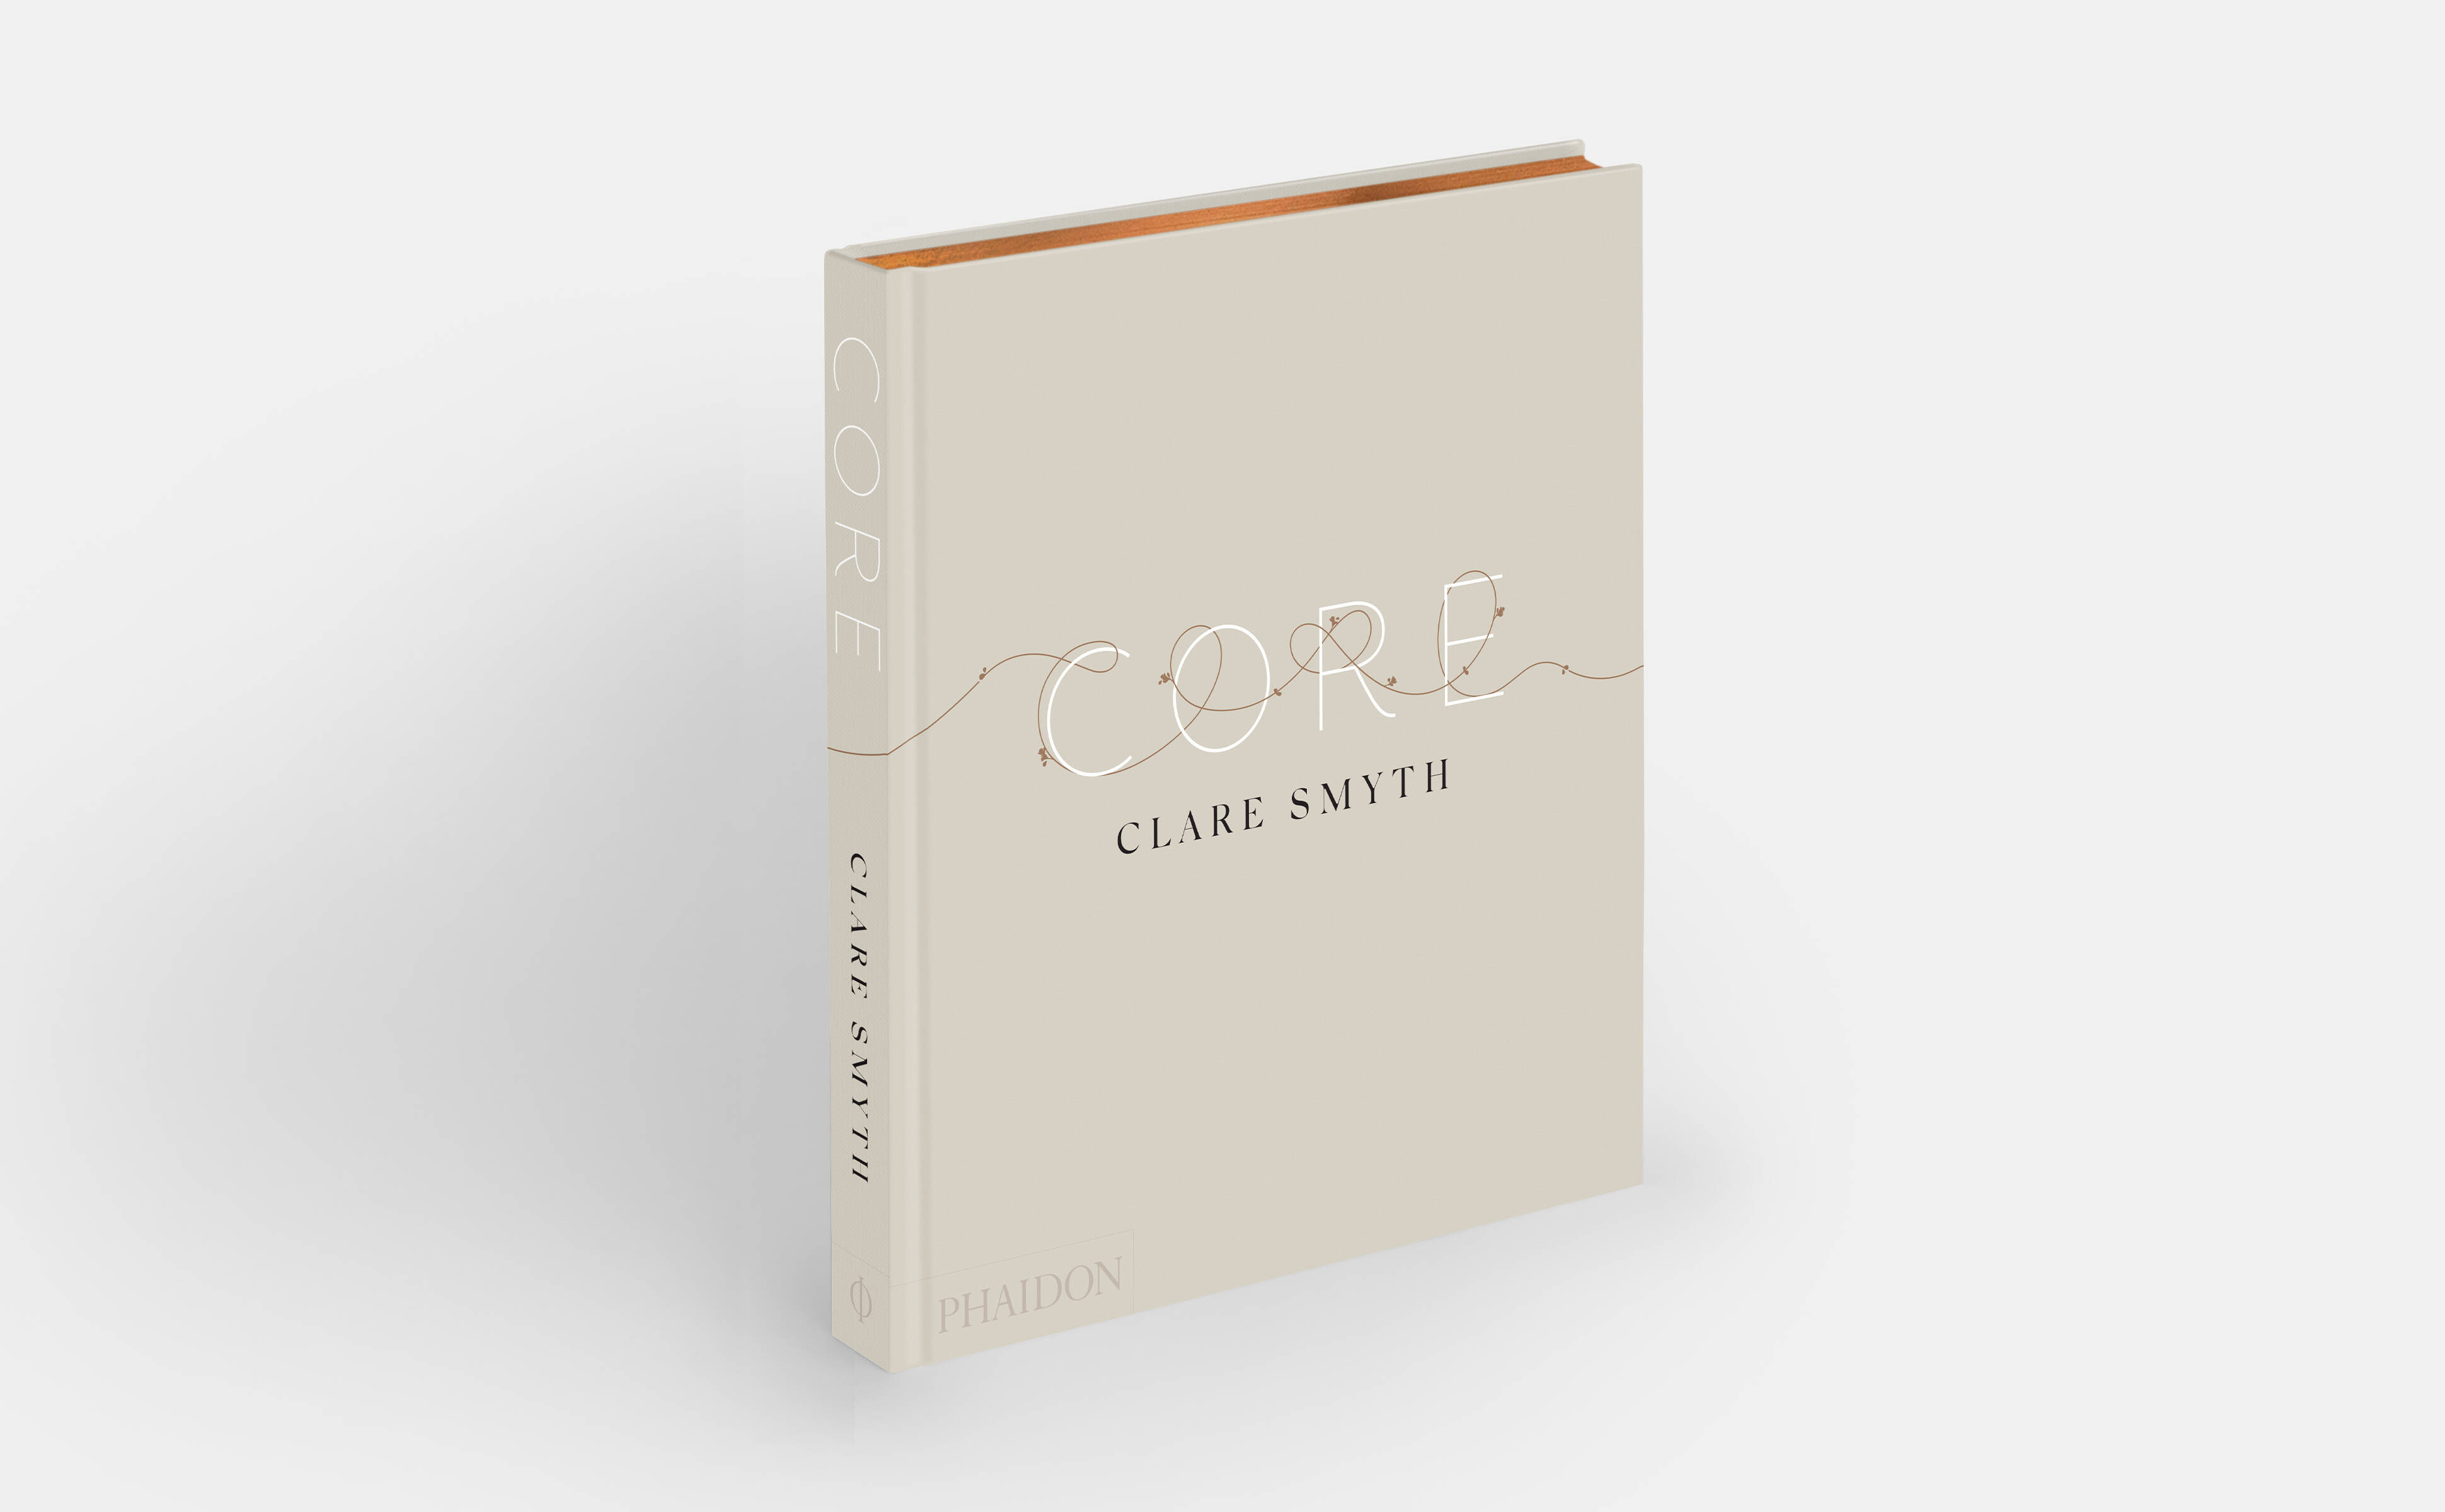 The ancient British grain Core’s Clare Smyth is making fashionable again